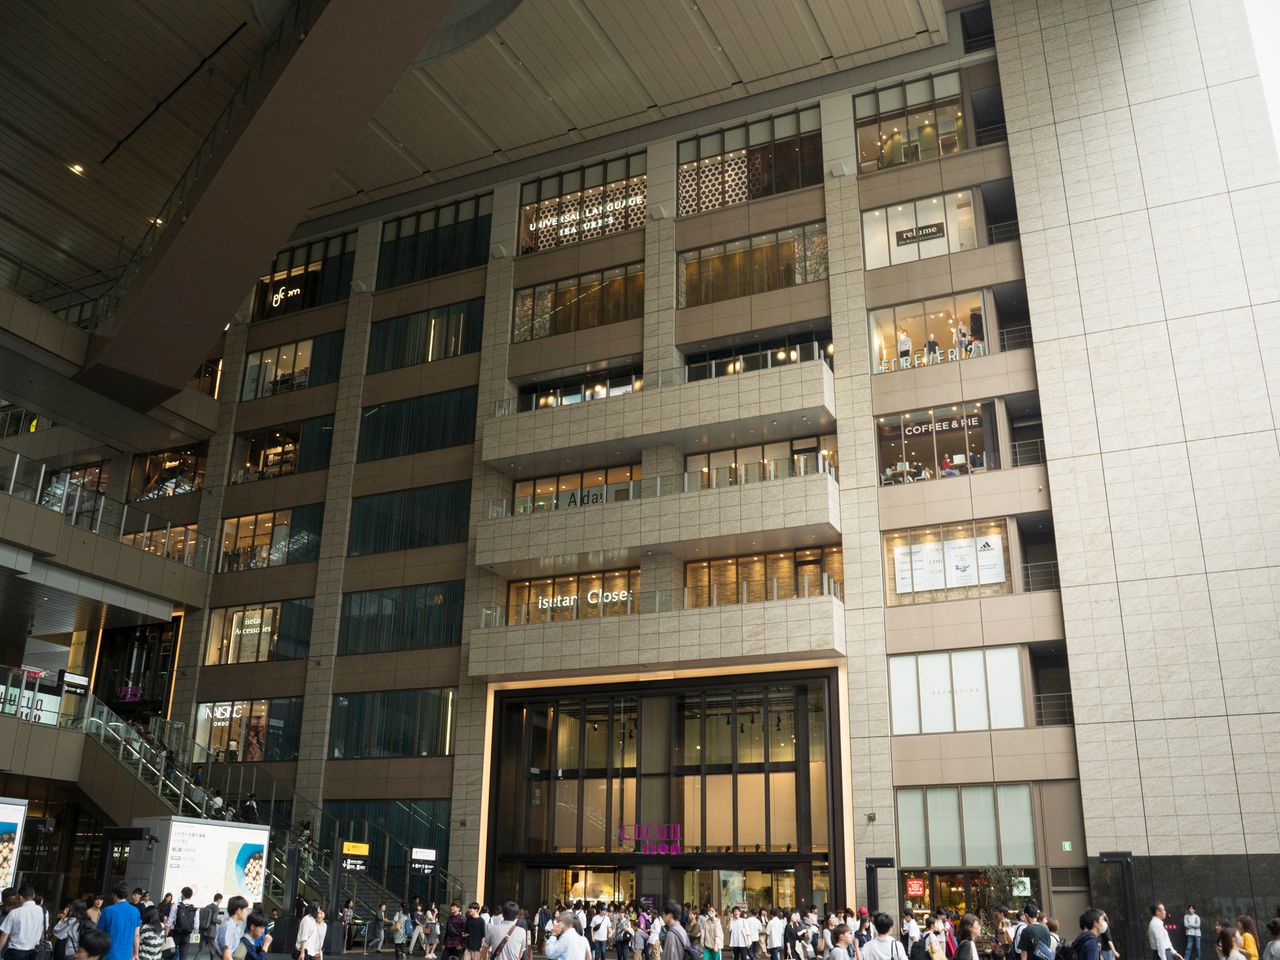 Together, Lucua 1100 and Lucua, which adjoin Osaka Station, form one of the largest station shopping complexes in Japan.